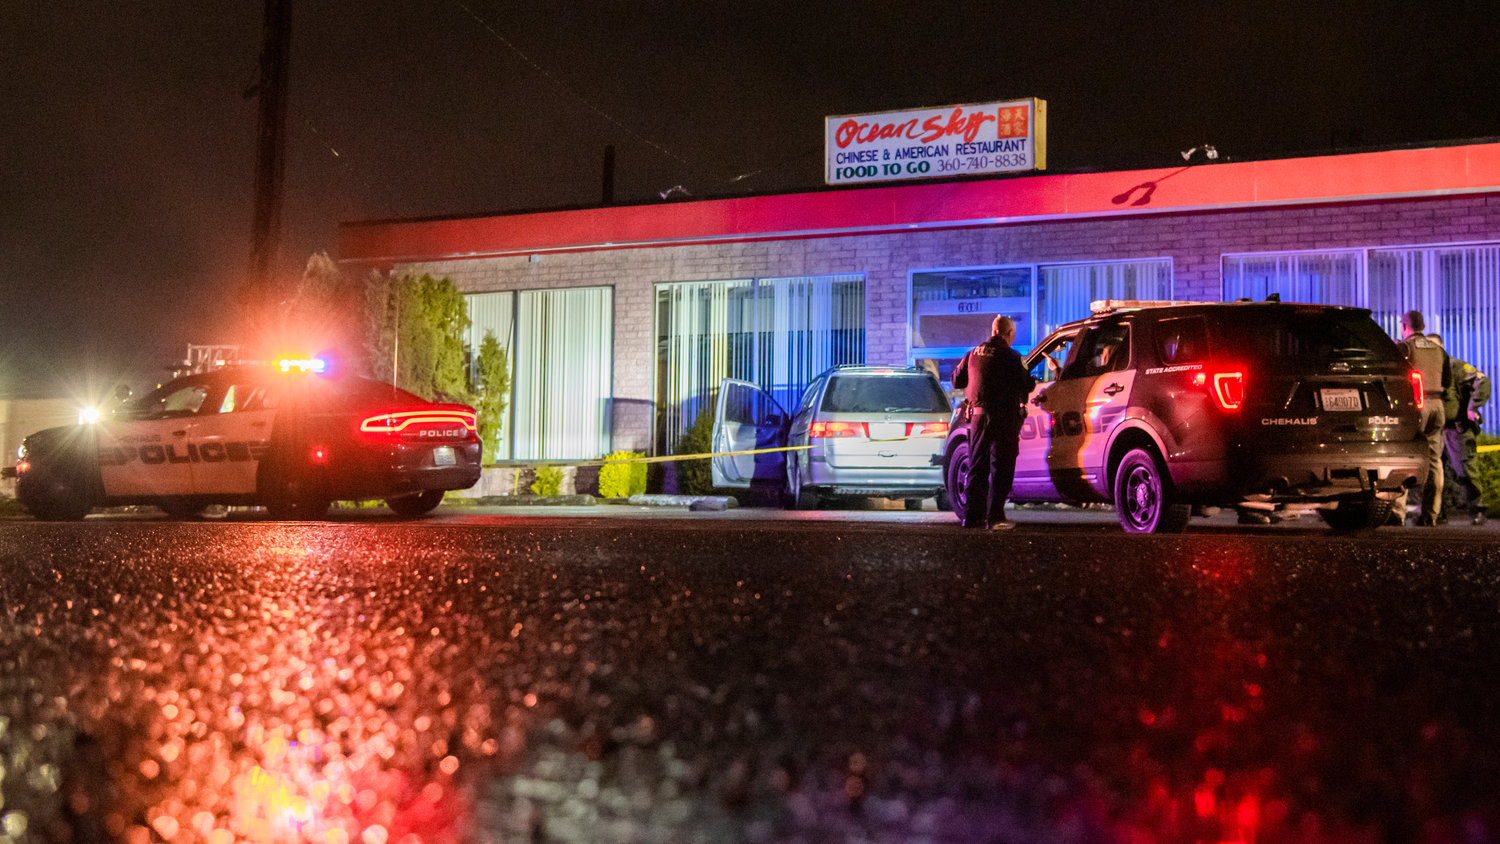 Chehalis Police surround a vehicle outside the Ocean Sky Chinese & American Restaurant Monday night as police tape stretches around the building.